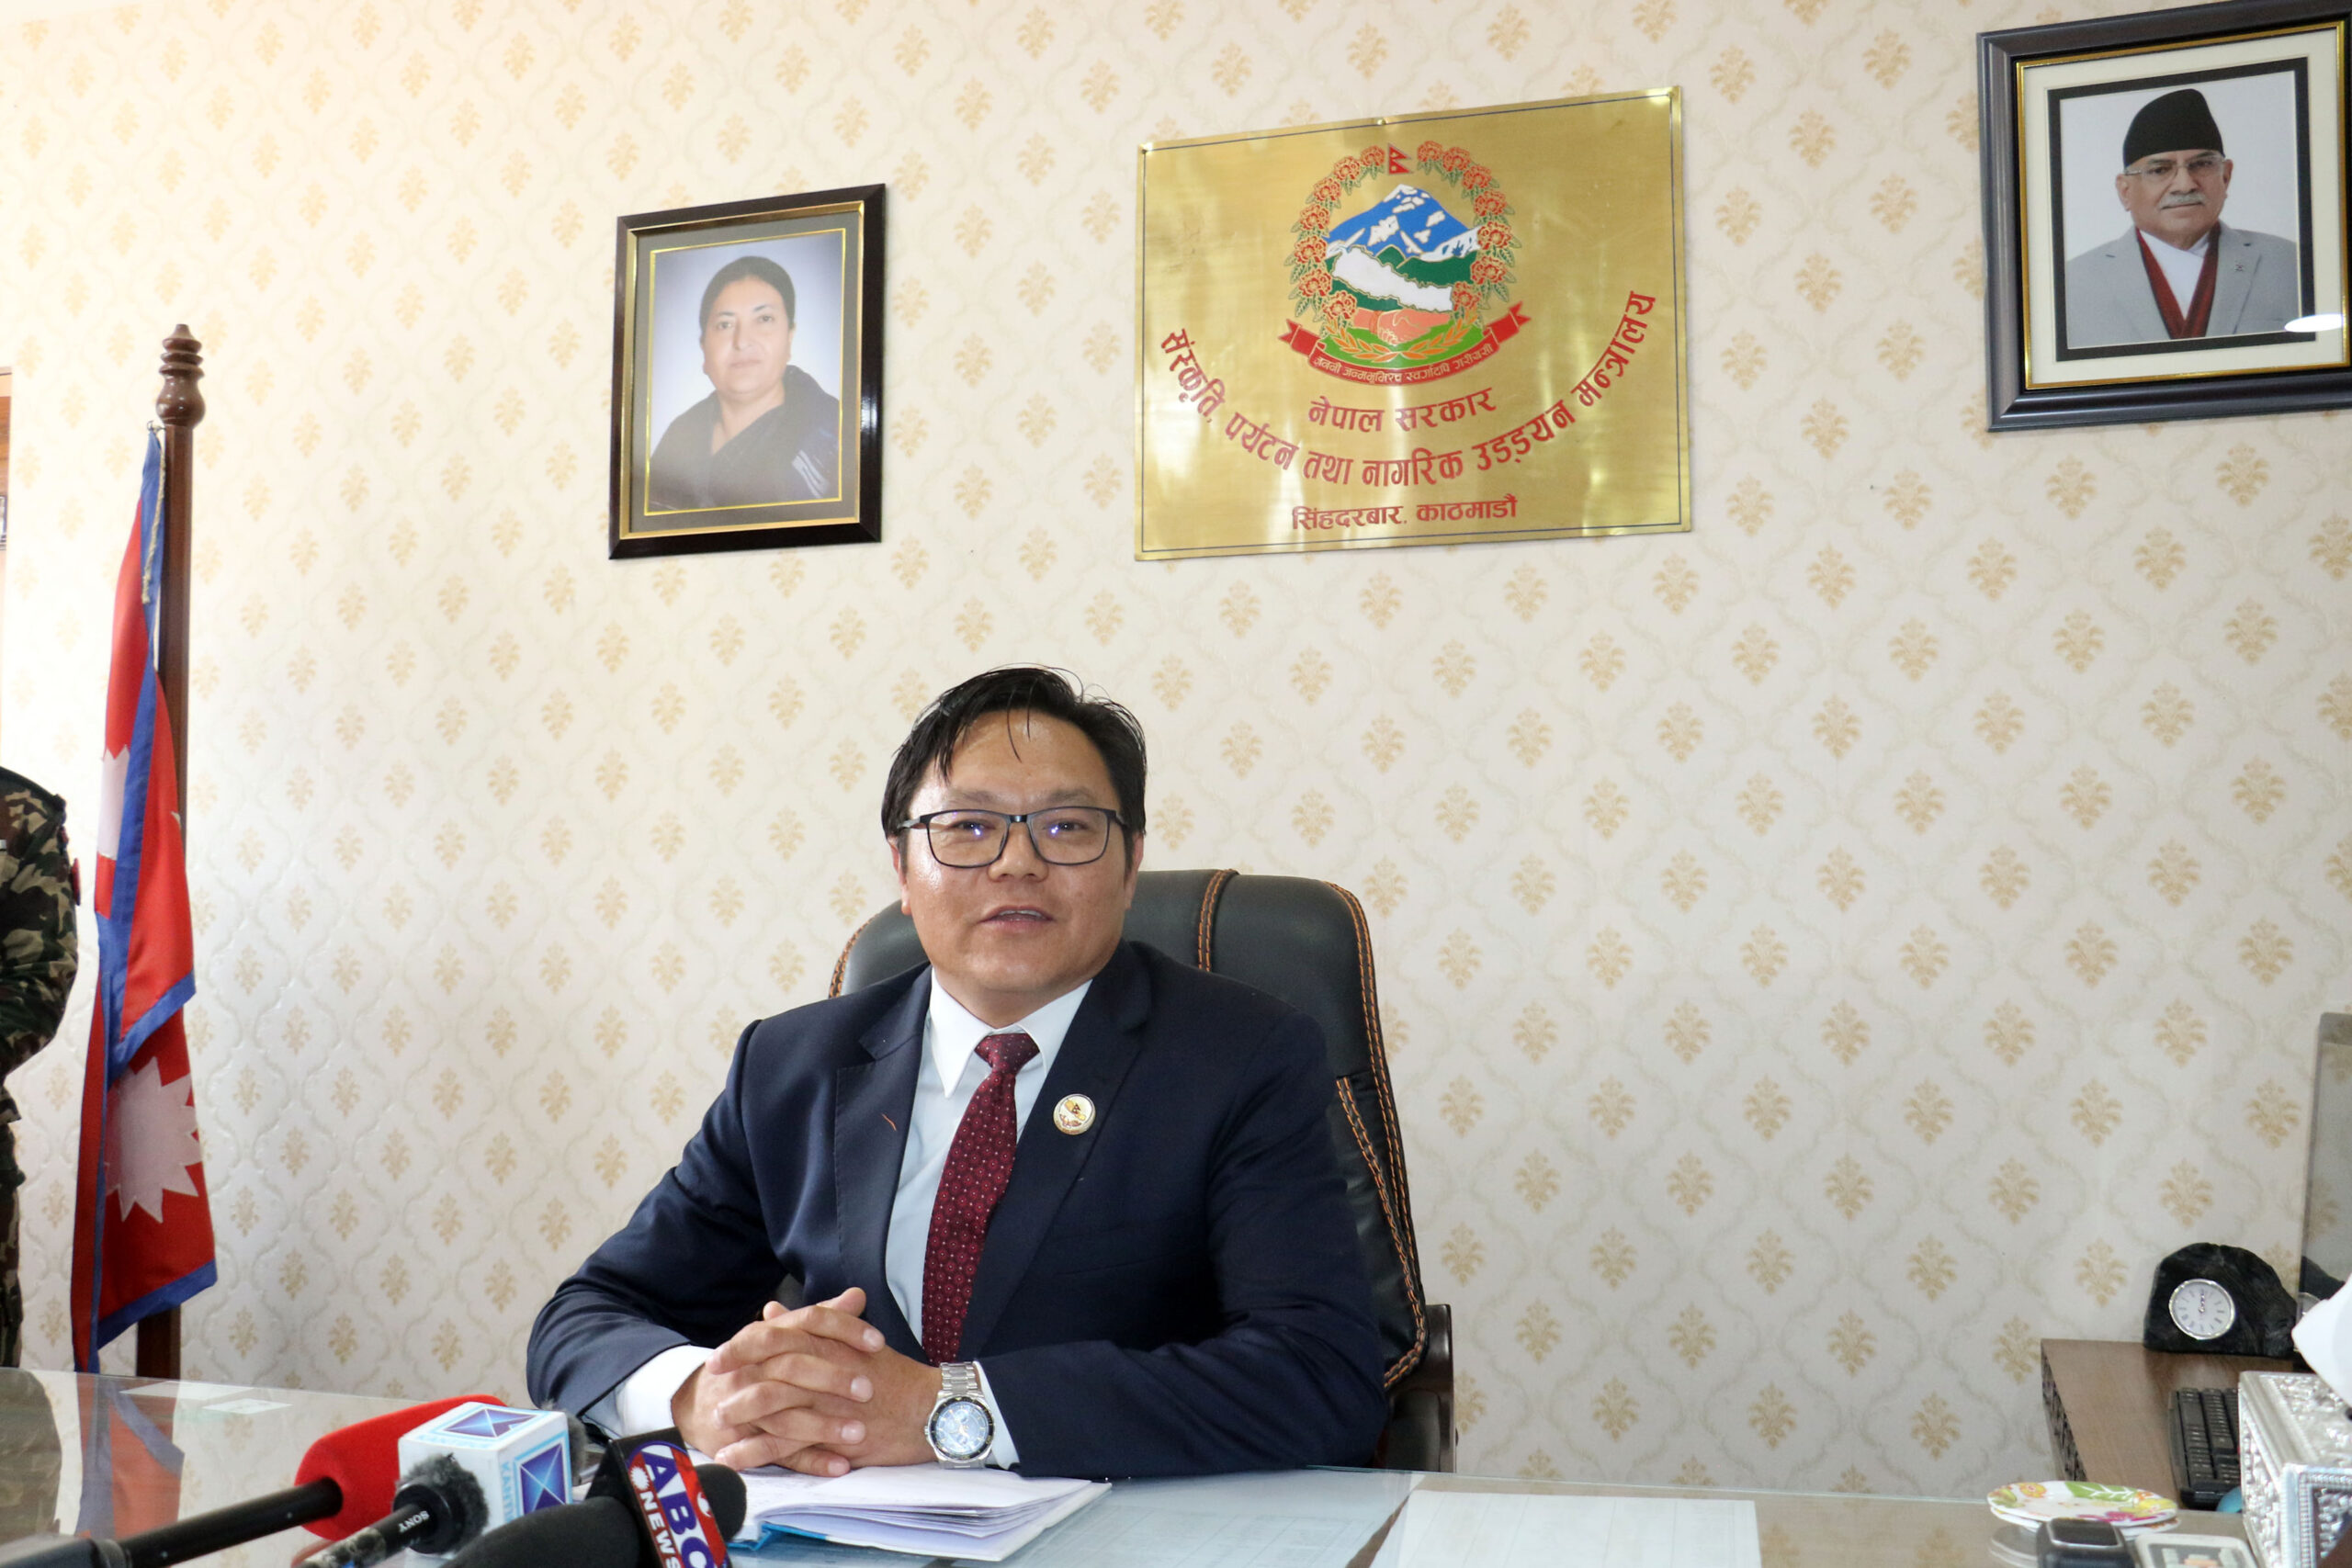 Minister Kirati clarifies controversial statement: “I respect everyone’s existence”